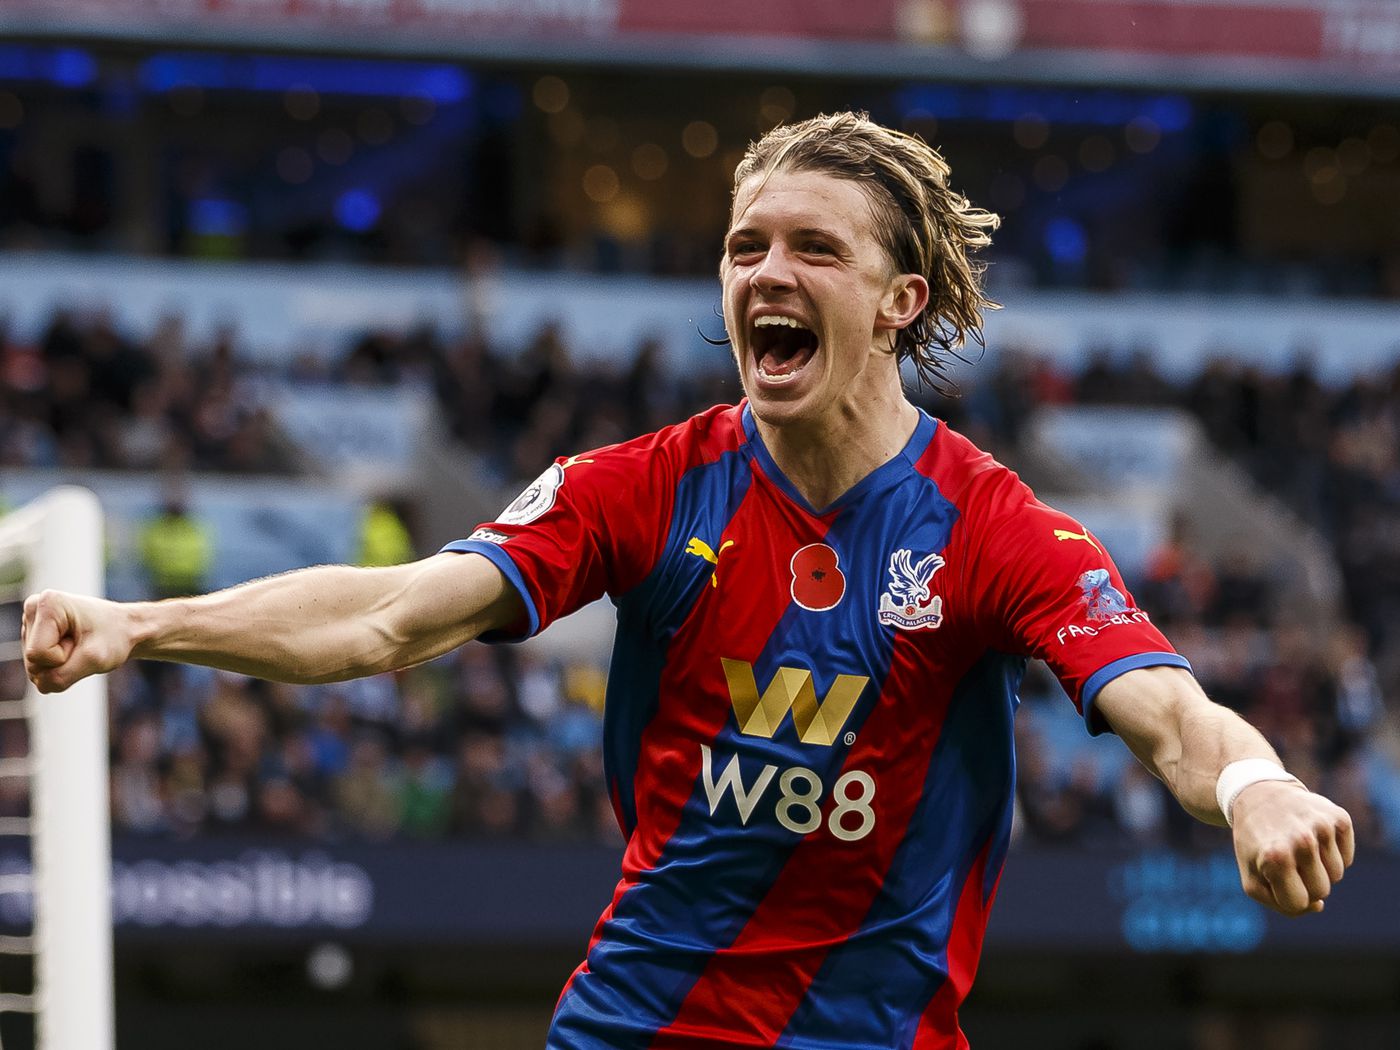 Chelsea loanee Conor Gallagher named the Crystal Palace Player of the Season 2021/22.